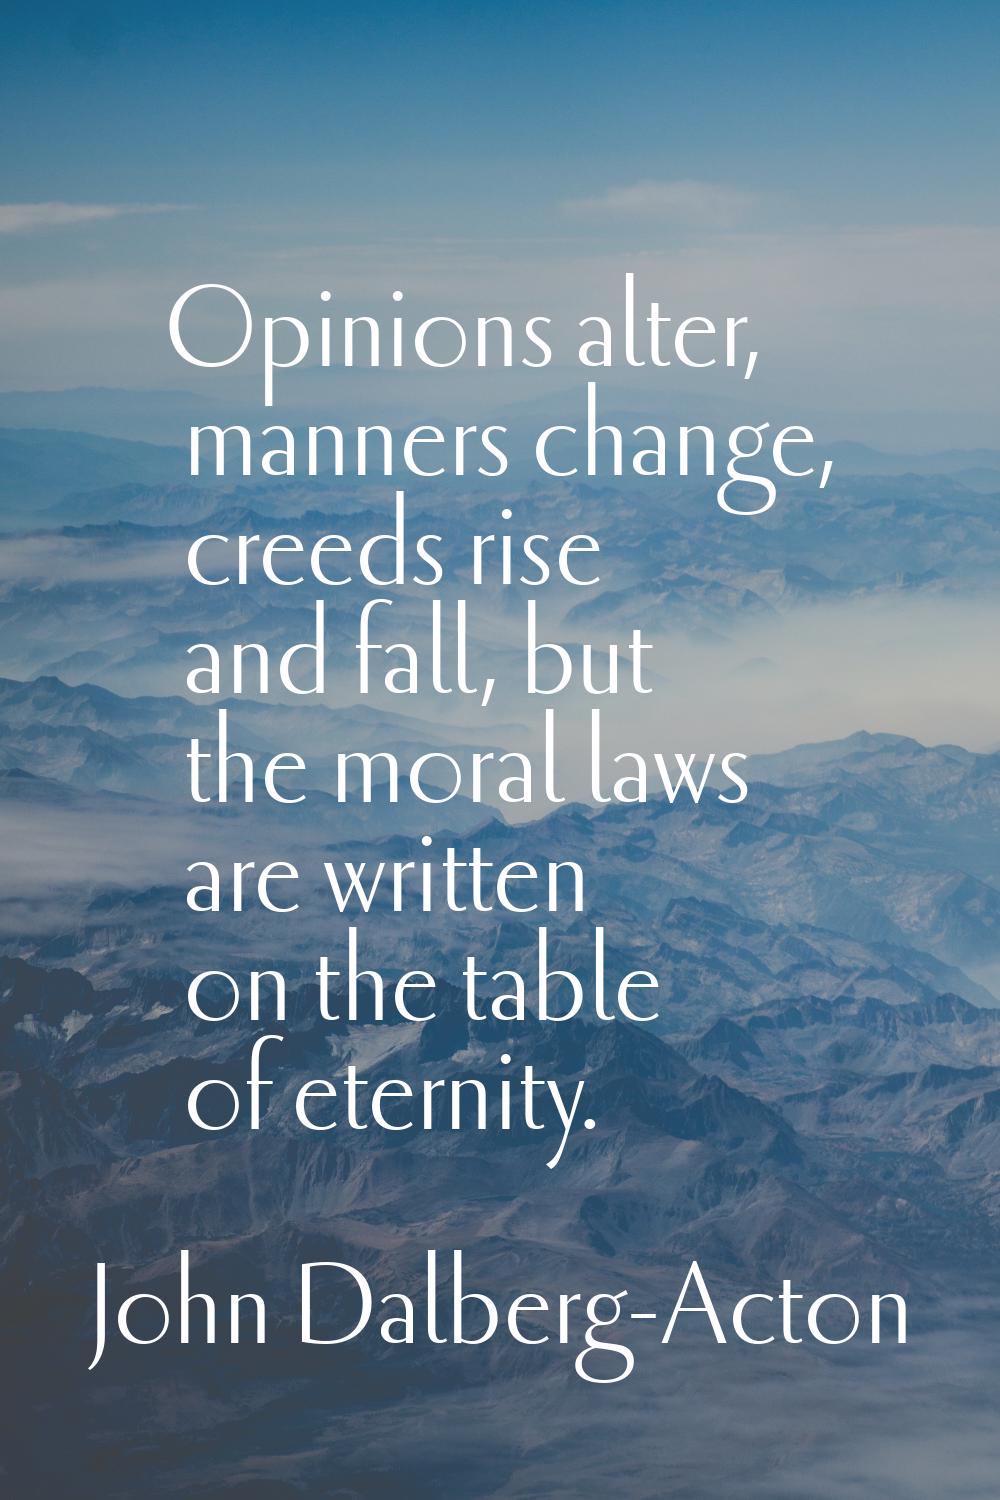 Opinions alter, manners change, creeds rise and fall, but the moral laws are written on the table o